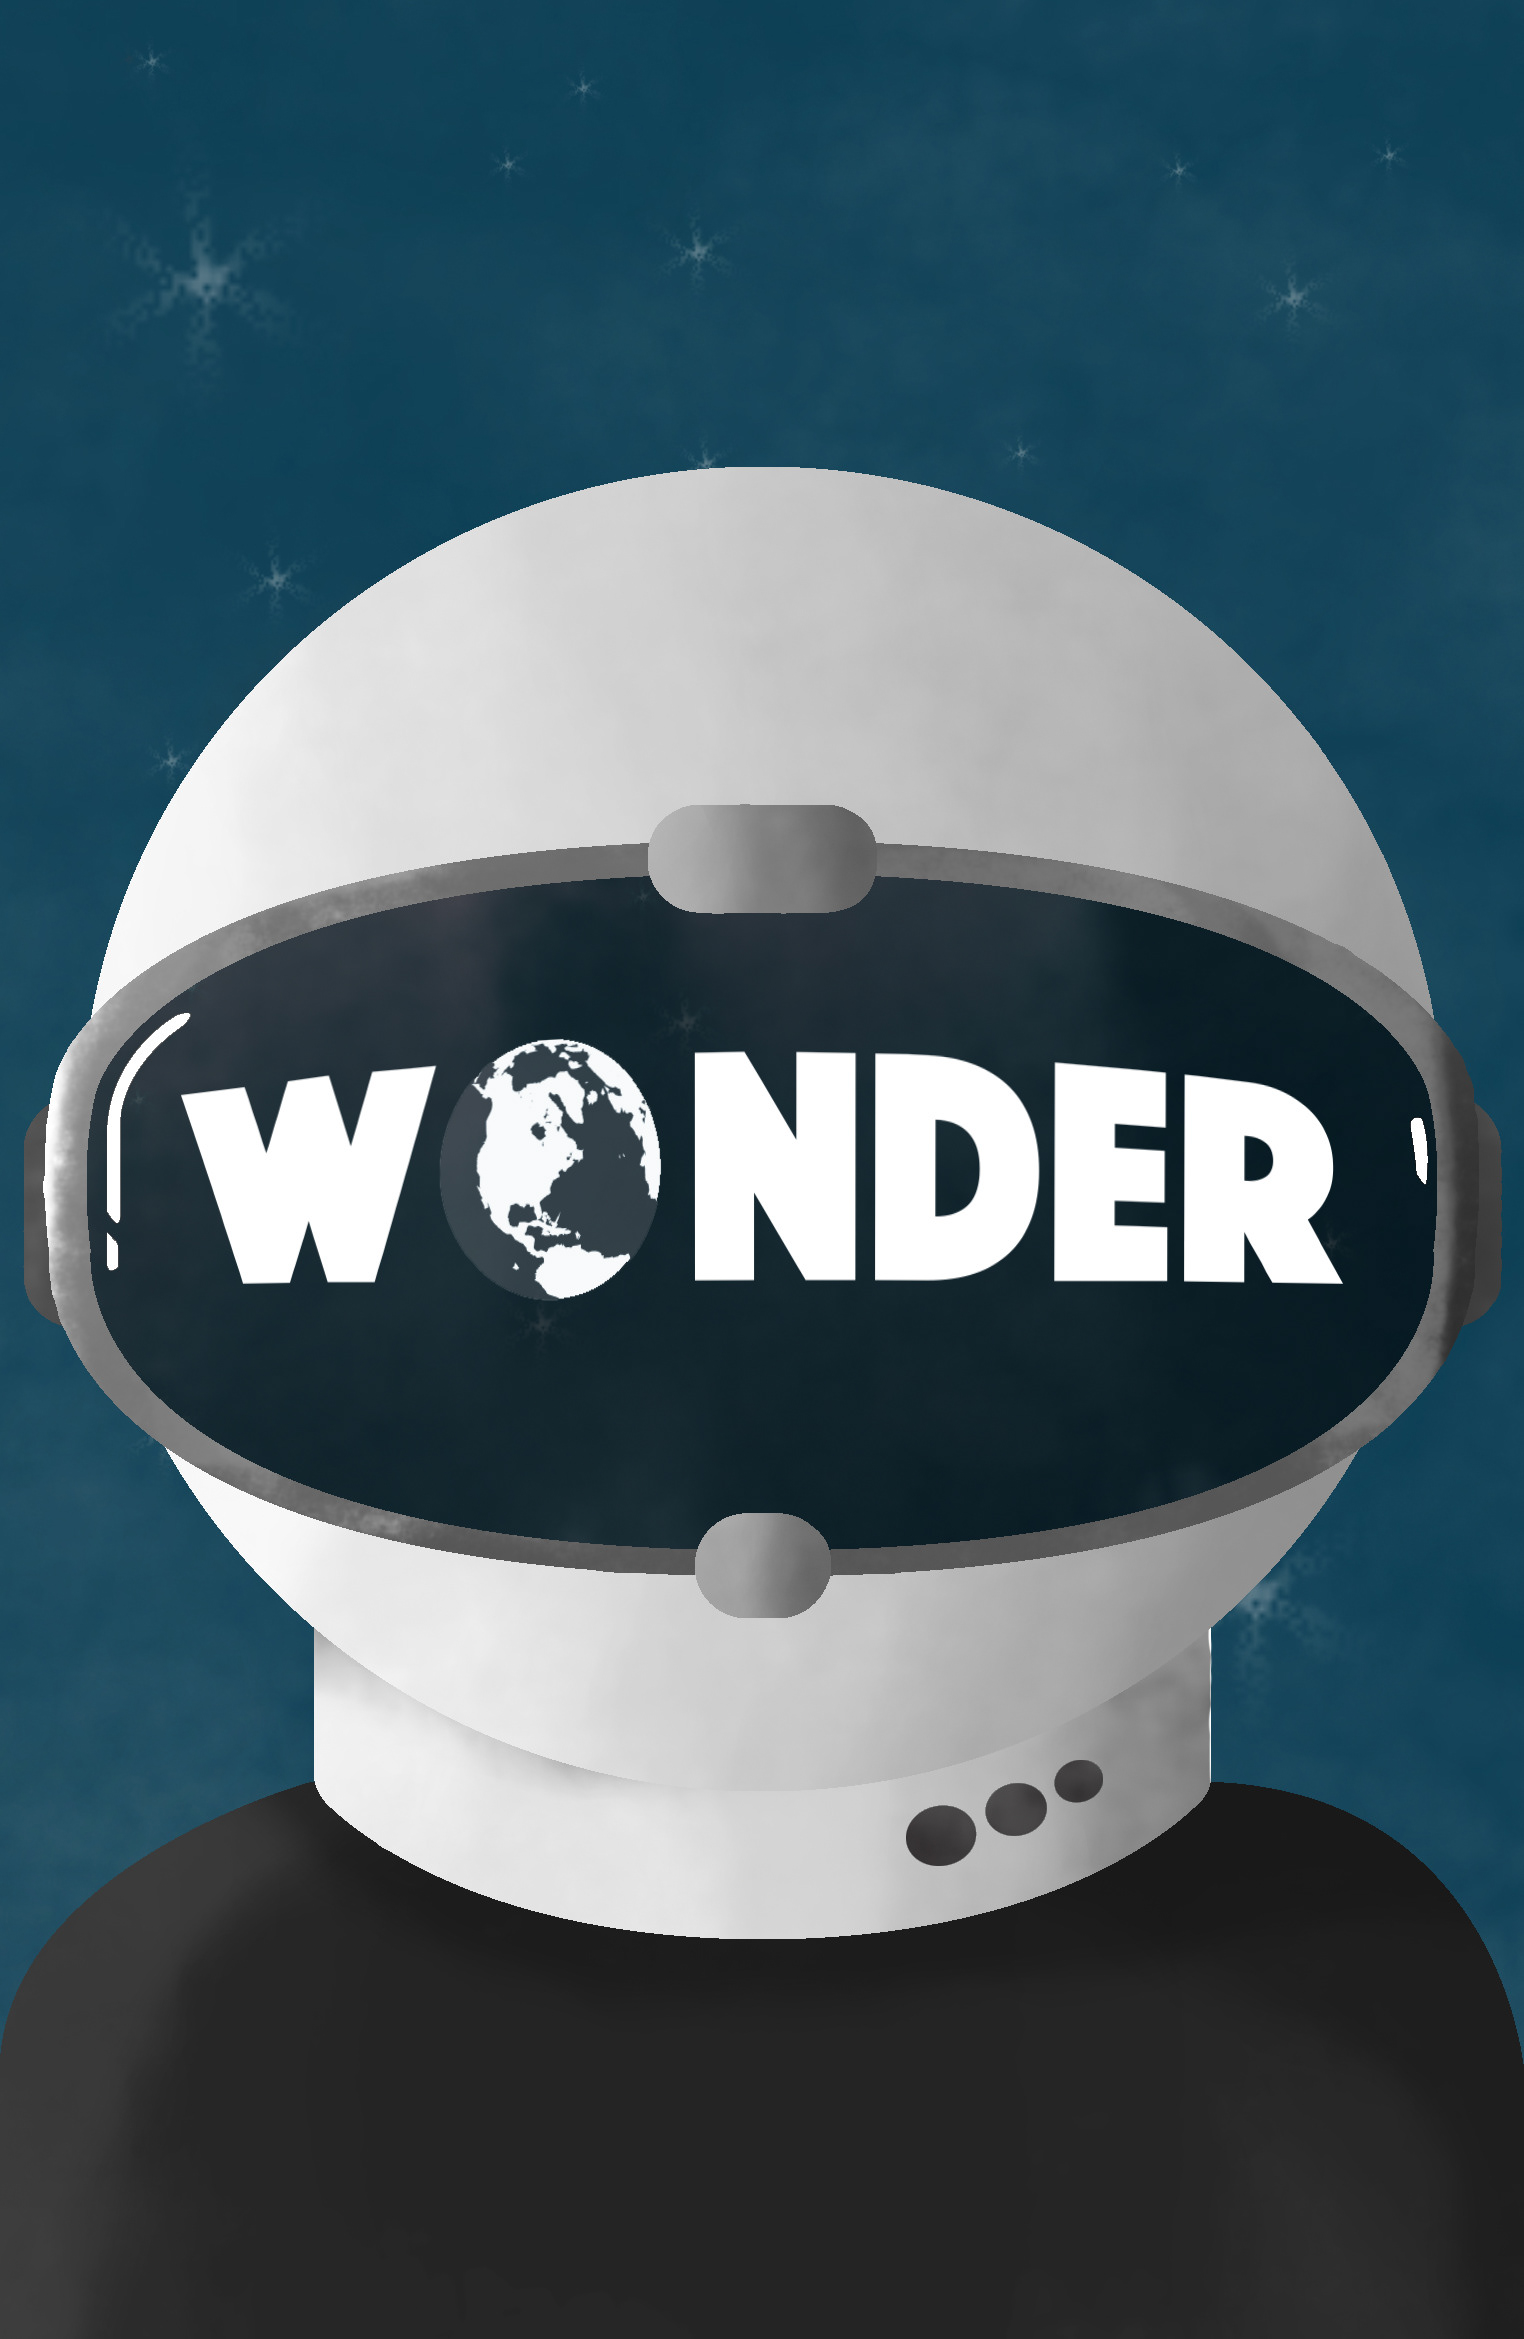 Designs by Zak - Wonder Book Cover